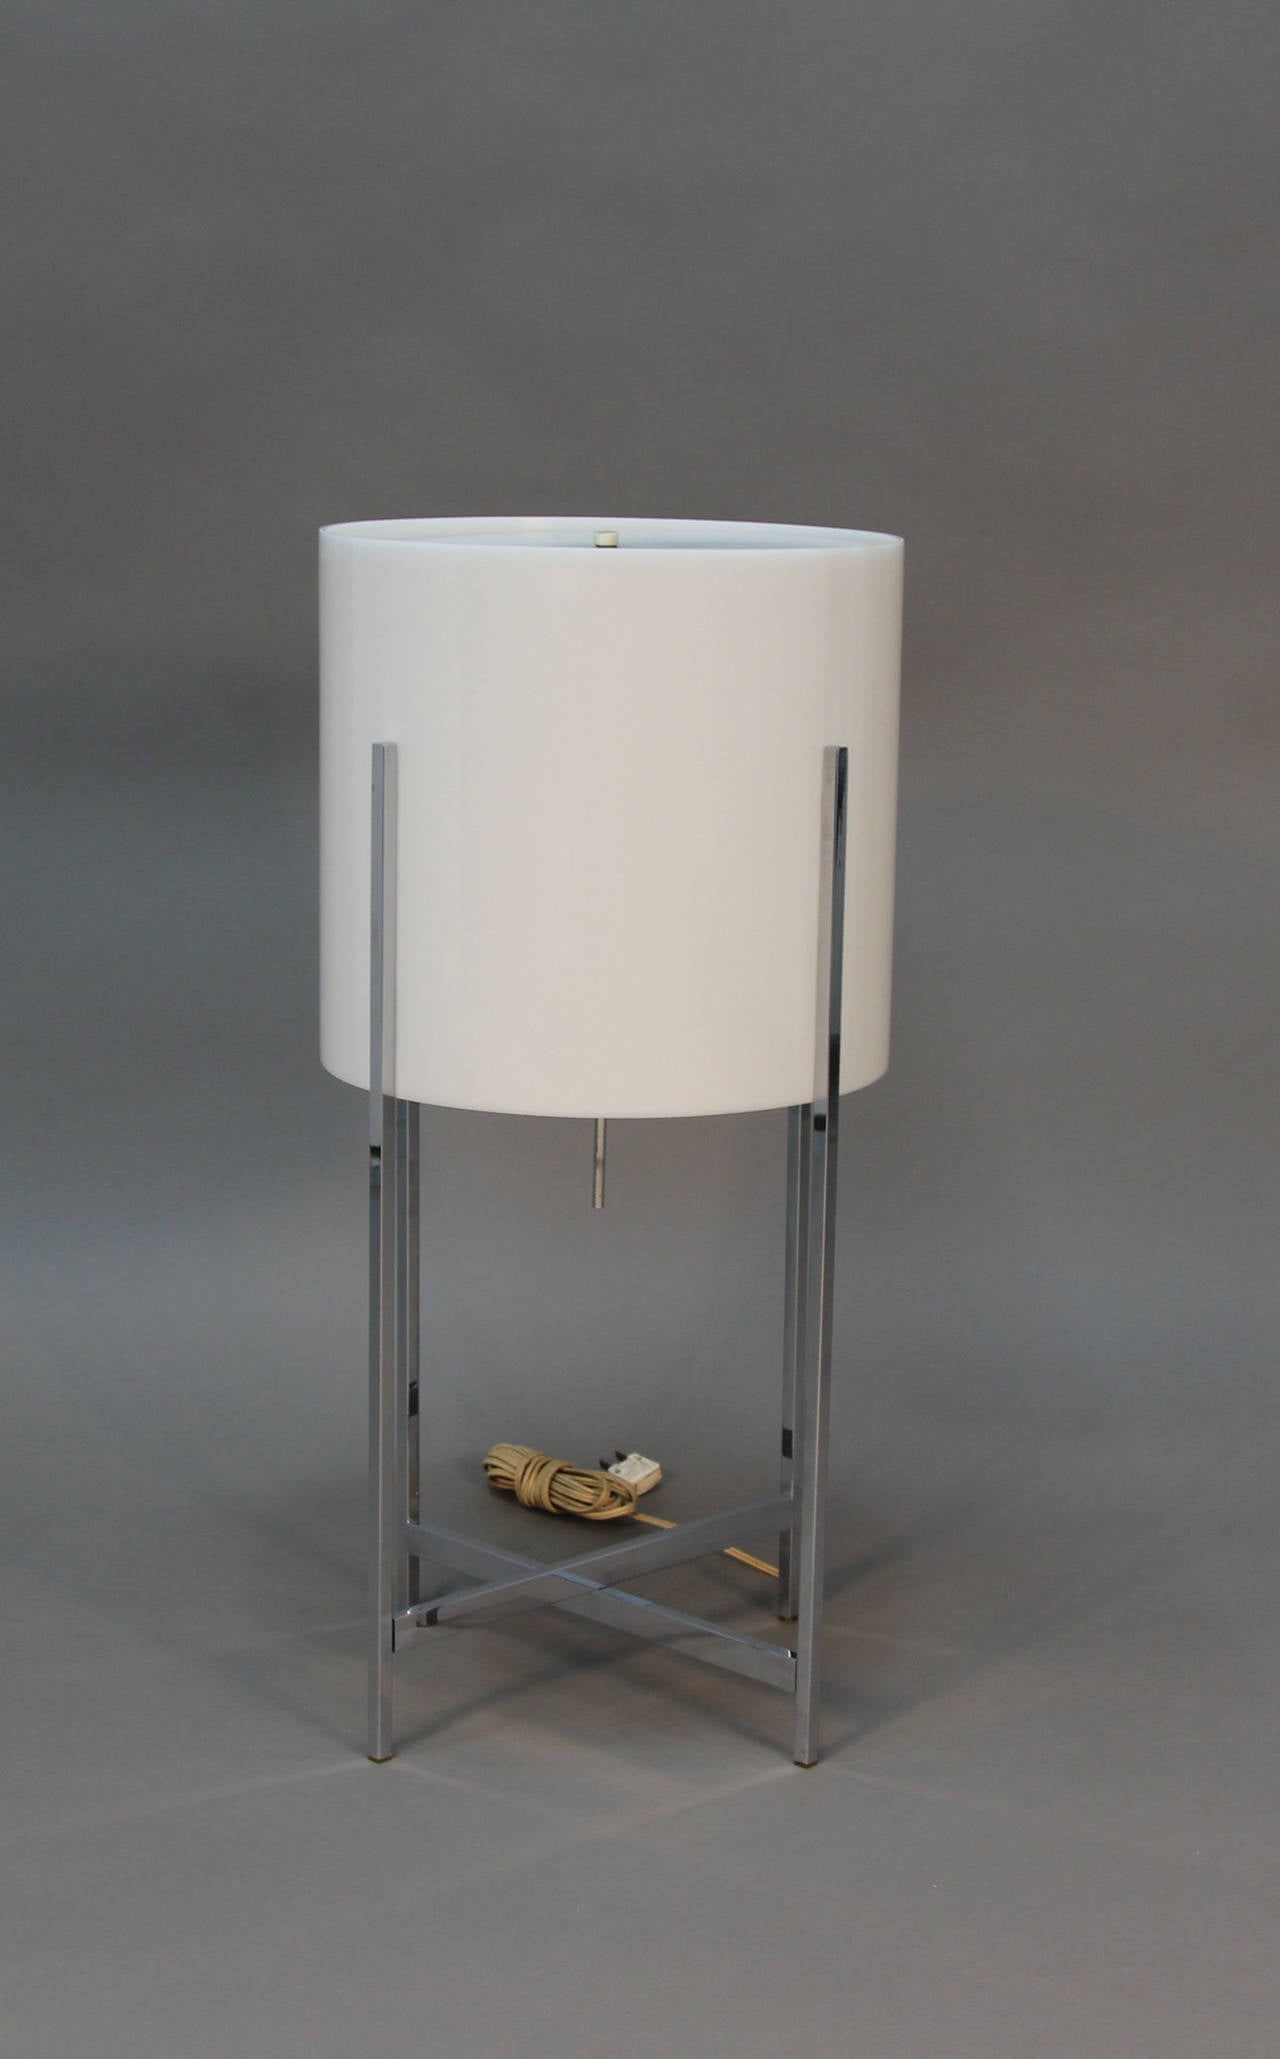 Beautiful Habitat lamp with criss cross chrome legs and white Lucite shade.